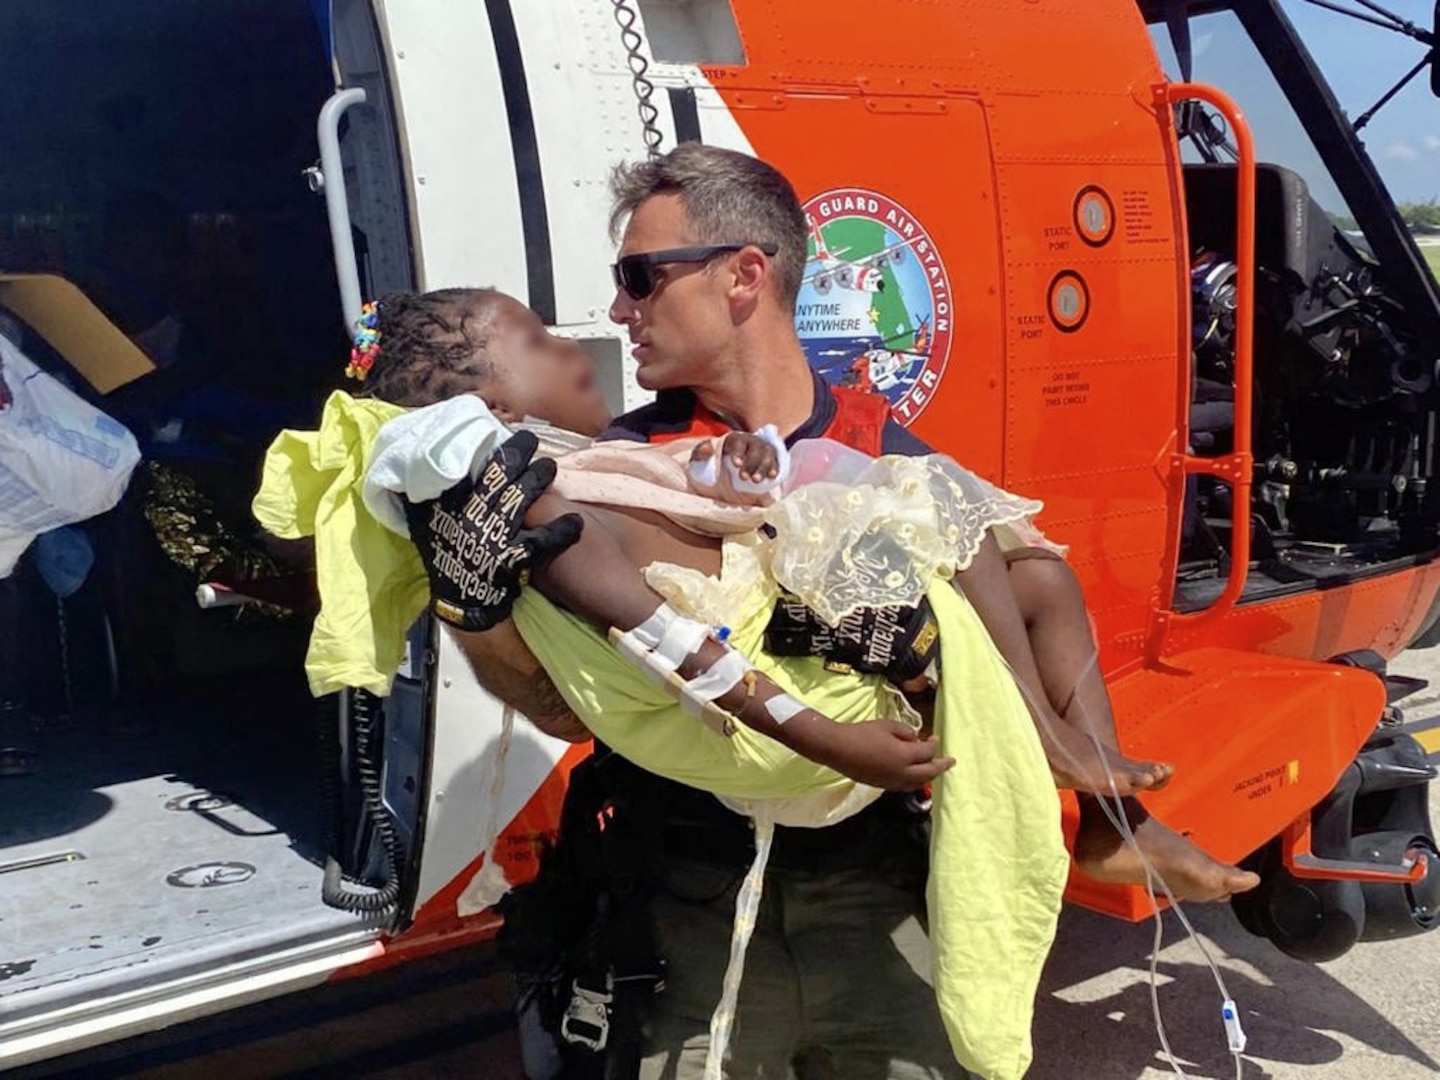 A Coast Guard air crew member helps transport a critically injured child from the helicopter to awaiting emergency medical services at Port au Prince, Haiti, Aug. 15, 2021. U.S. Coast Guard forward deployed Jayhawk helicopter crews are from Air Station Clearwater, Florida. (U.S. Coast Guard photo by Lt. David Steele)